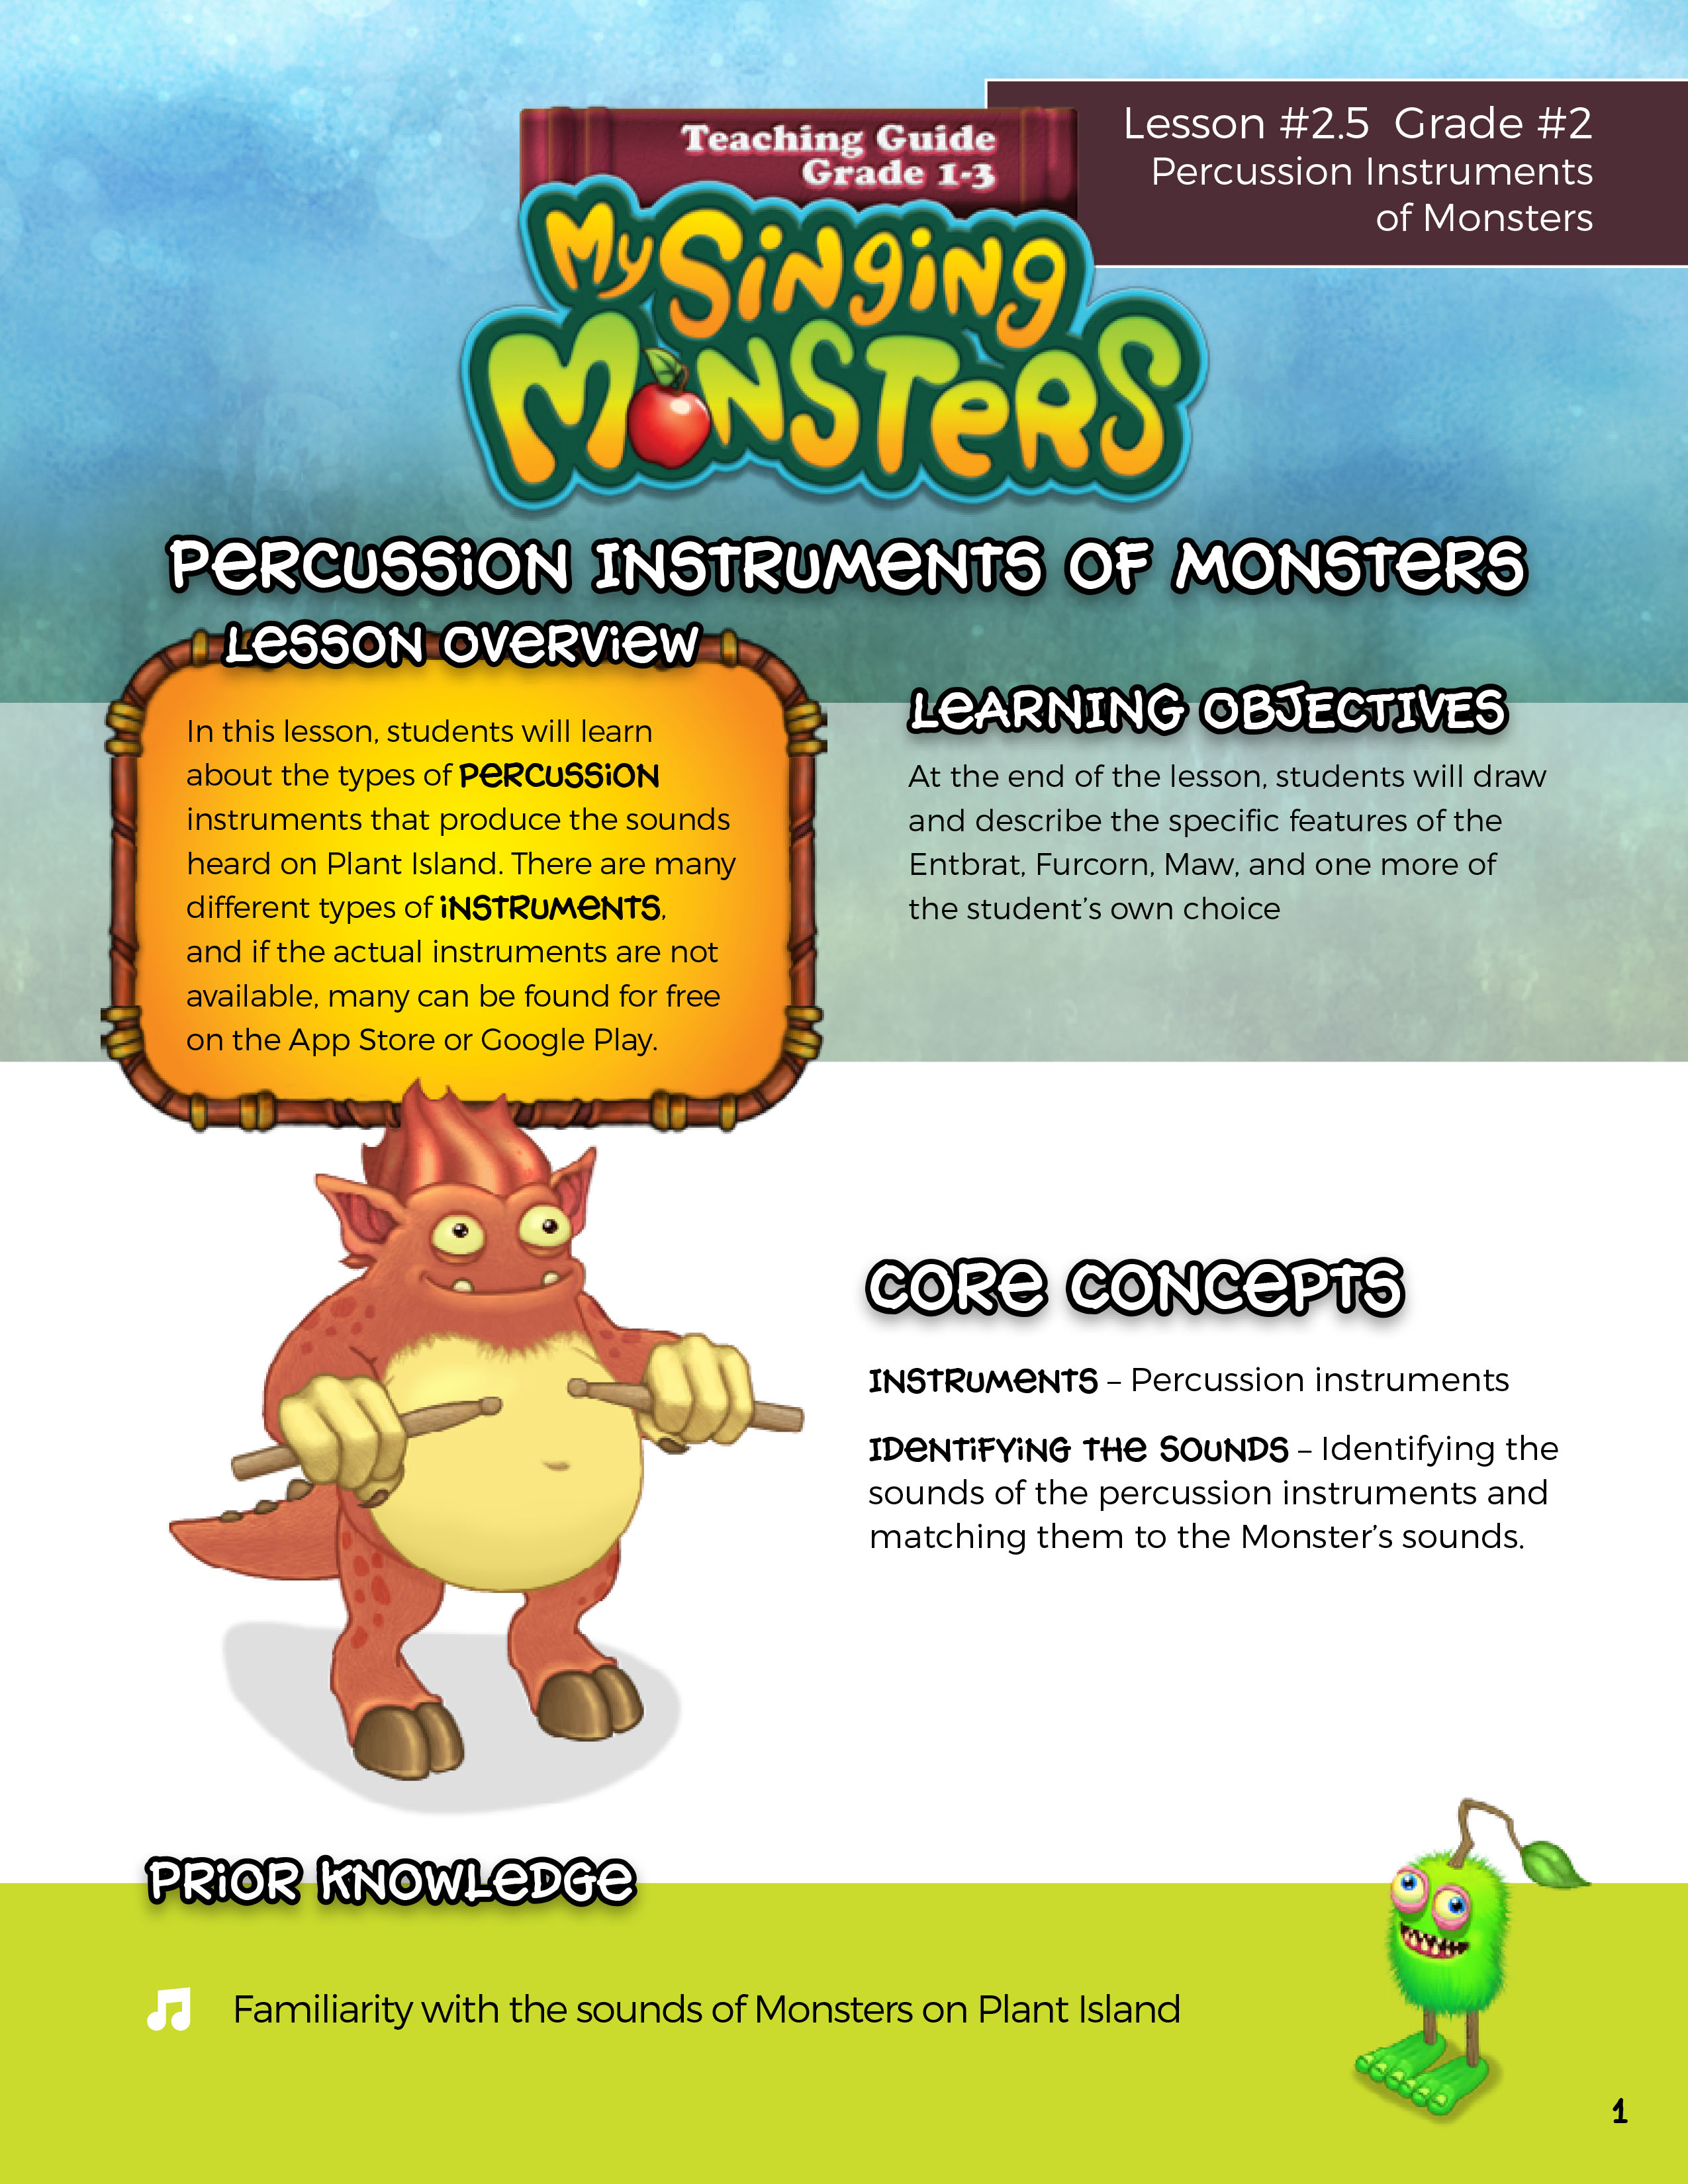 Lesson 2.5 Percussion Instruments of Monsters